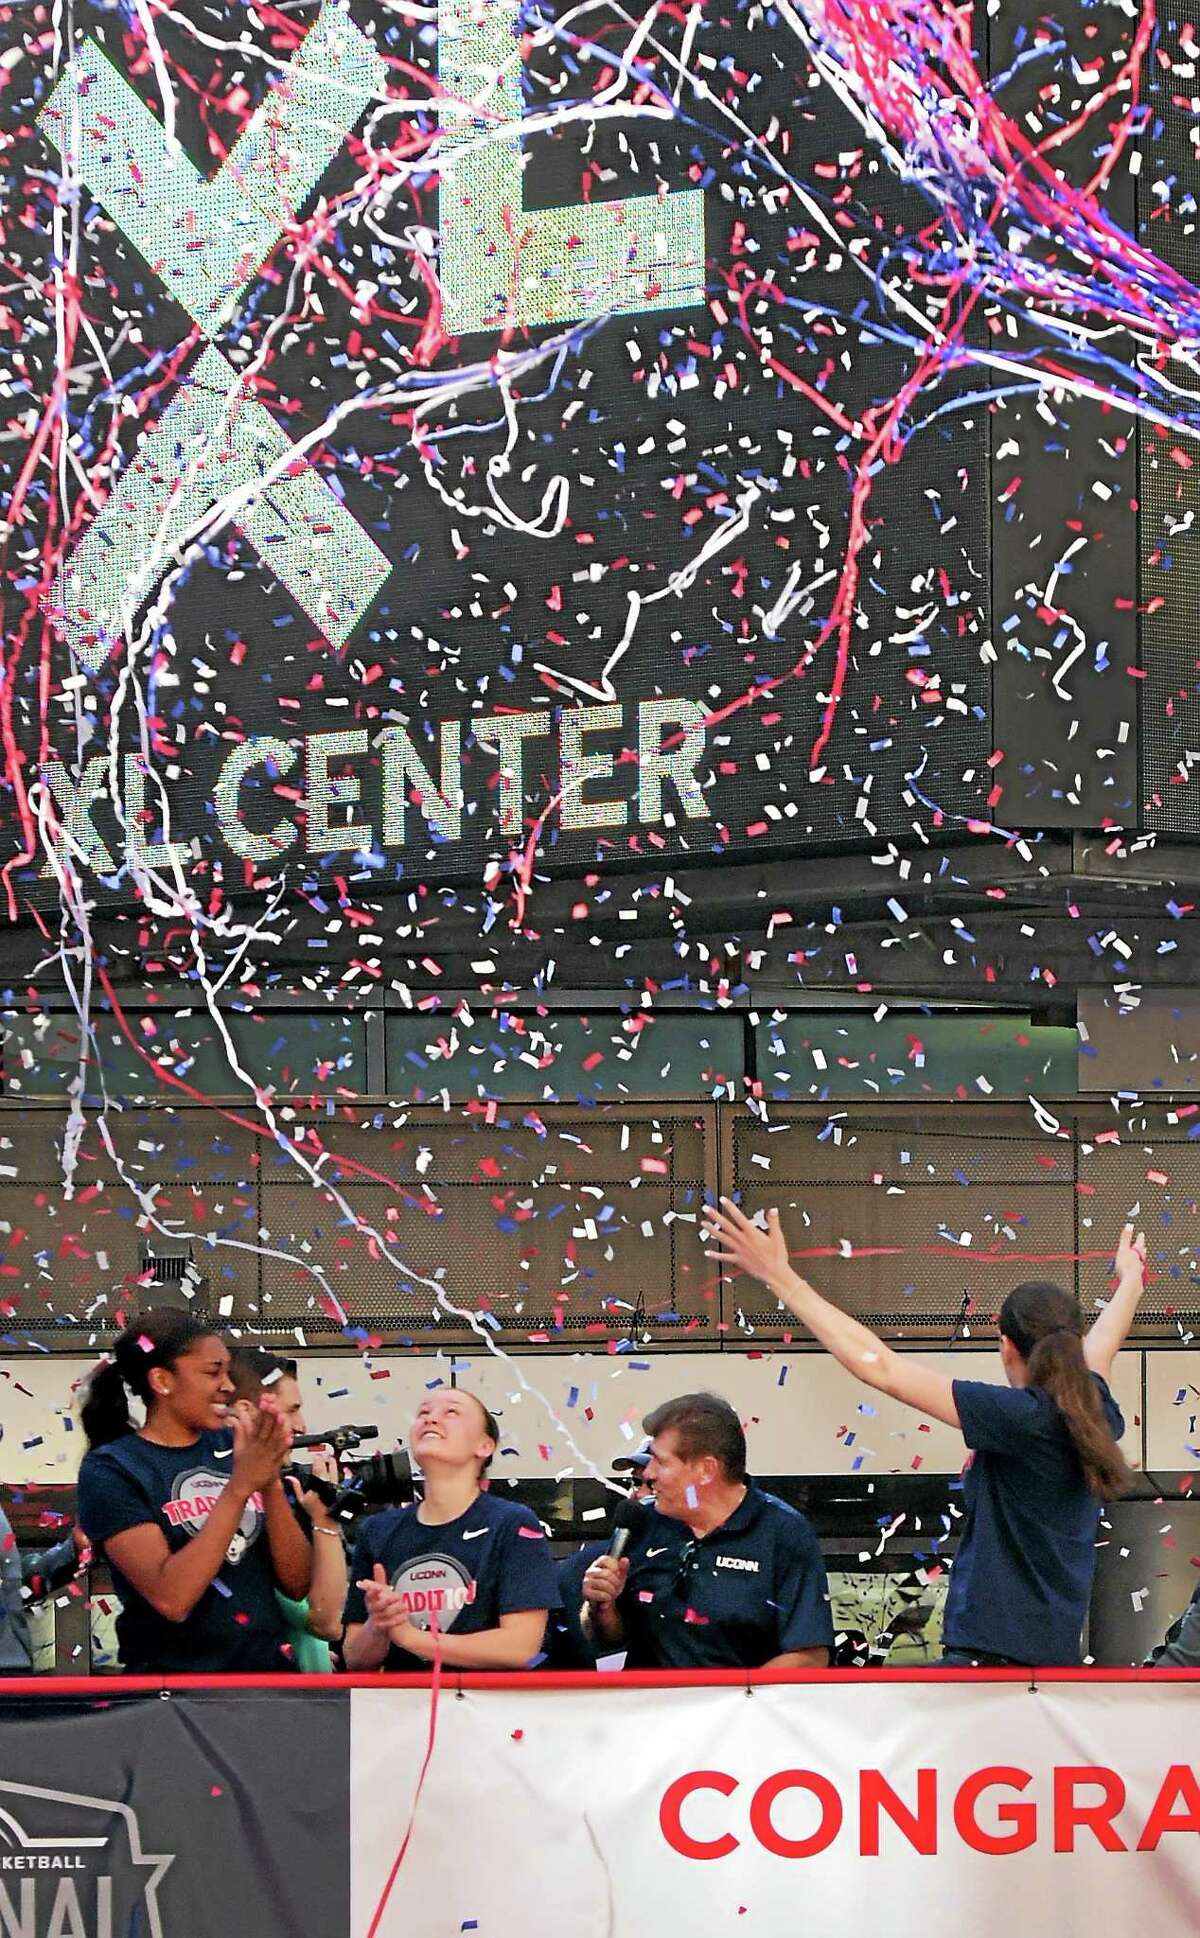 (Peter Hvizdak - New Haven Register) Confetti falls on the 2015 NCAA National Champion University of Connecticut Women's Basketball team as it is honored during a rally after a victory parade sponsored by the State of Connecticut, the City of Hartford, and the Hartford Business Improvement District Sunday afternoon congratulating them for their efforts.